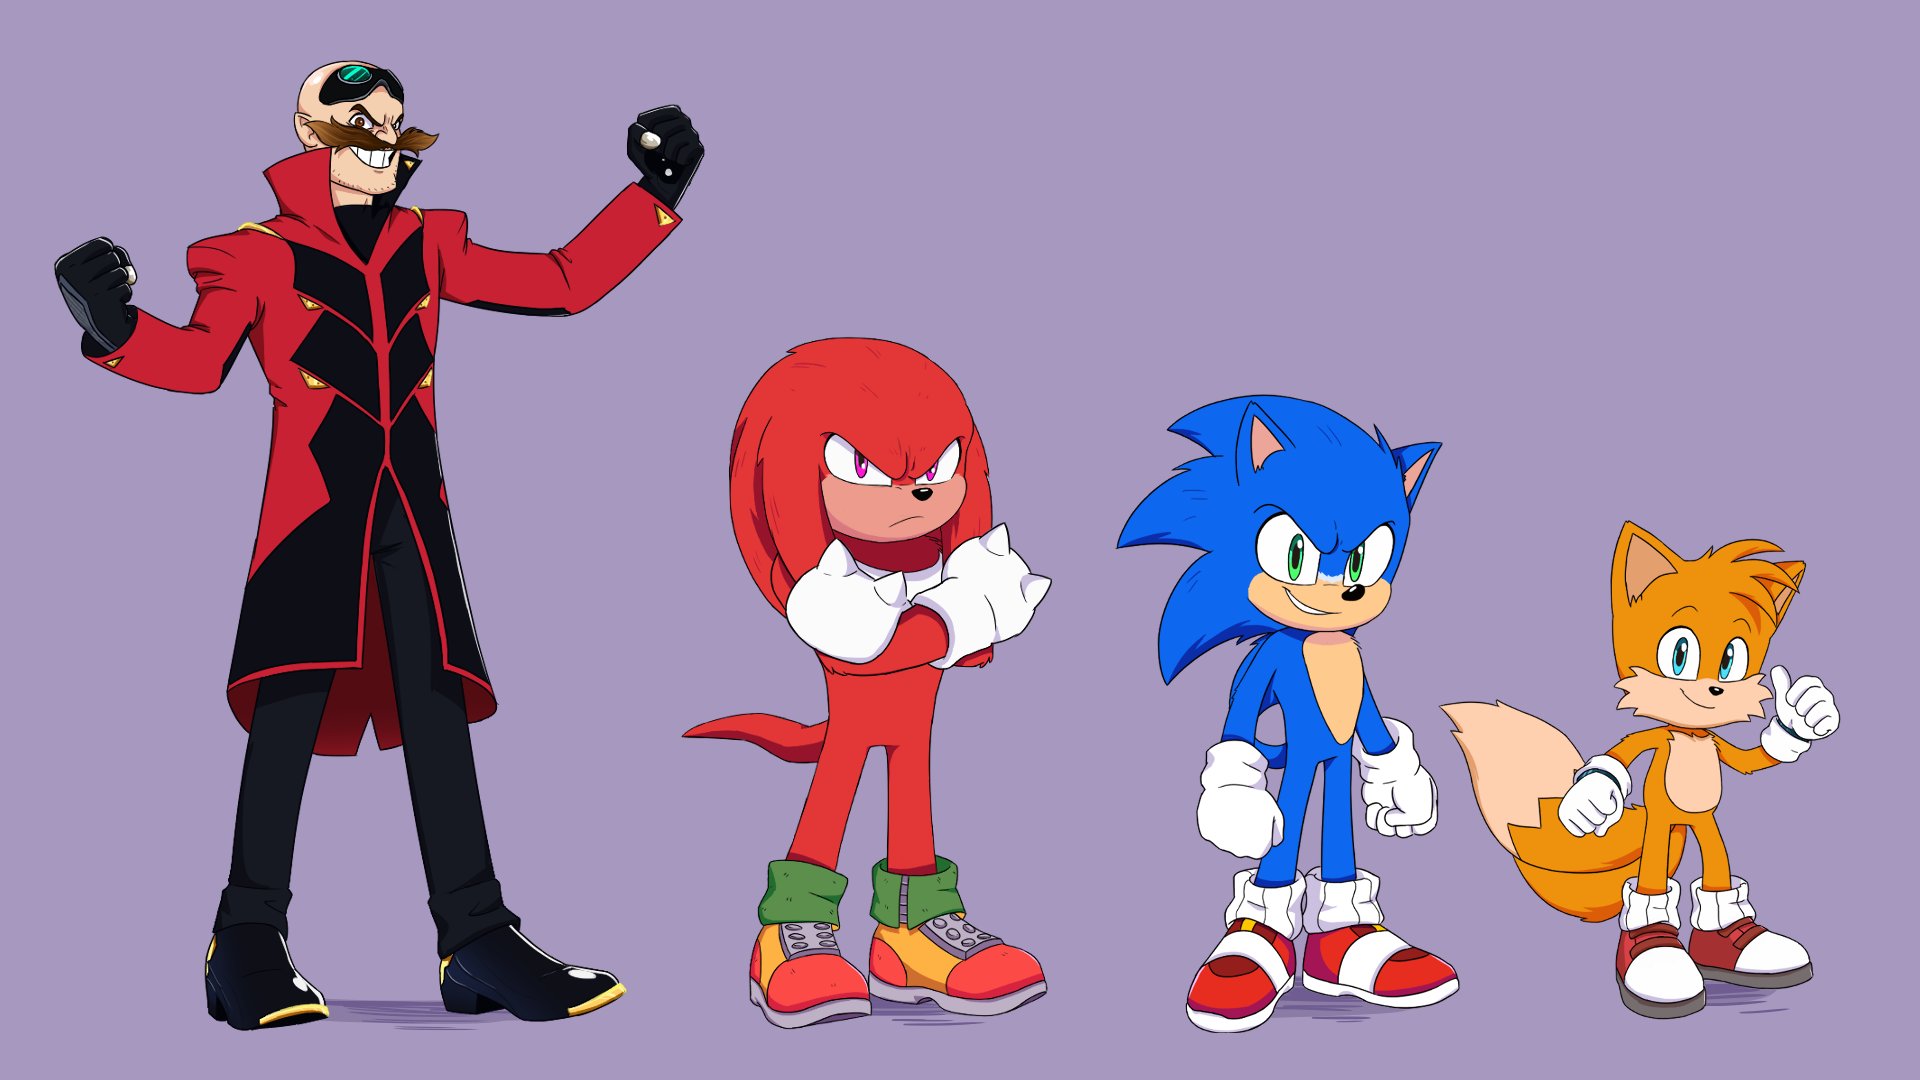 General 1920x1080 Sonic Sonic 2 The Movie Sonic the Hedgehog Paramount Sega Dr. Robotnik Jim Carrey Knuckles Tails (character) simple background fox hedgehog video game characters